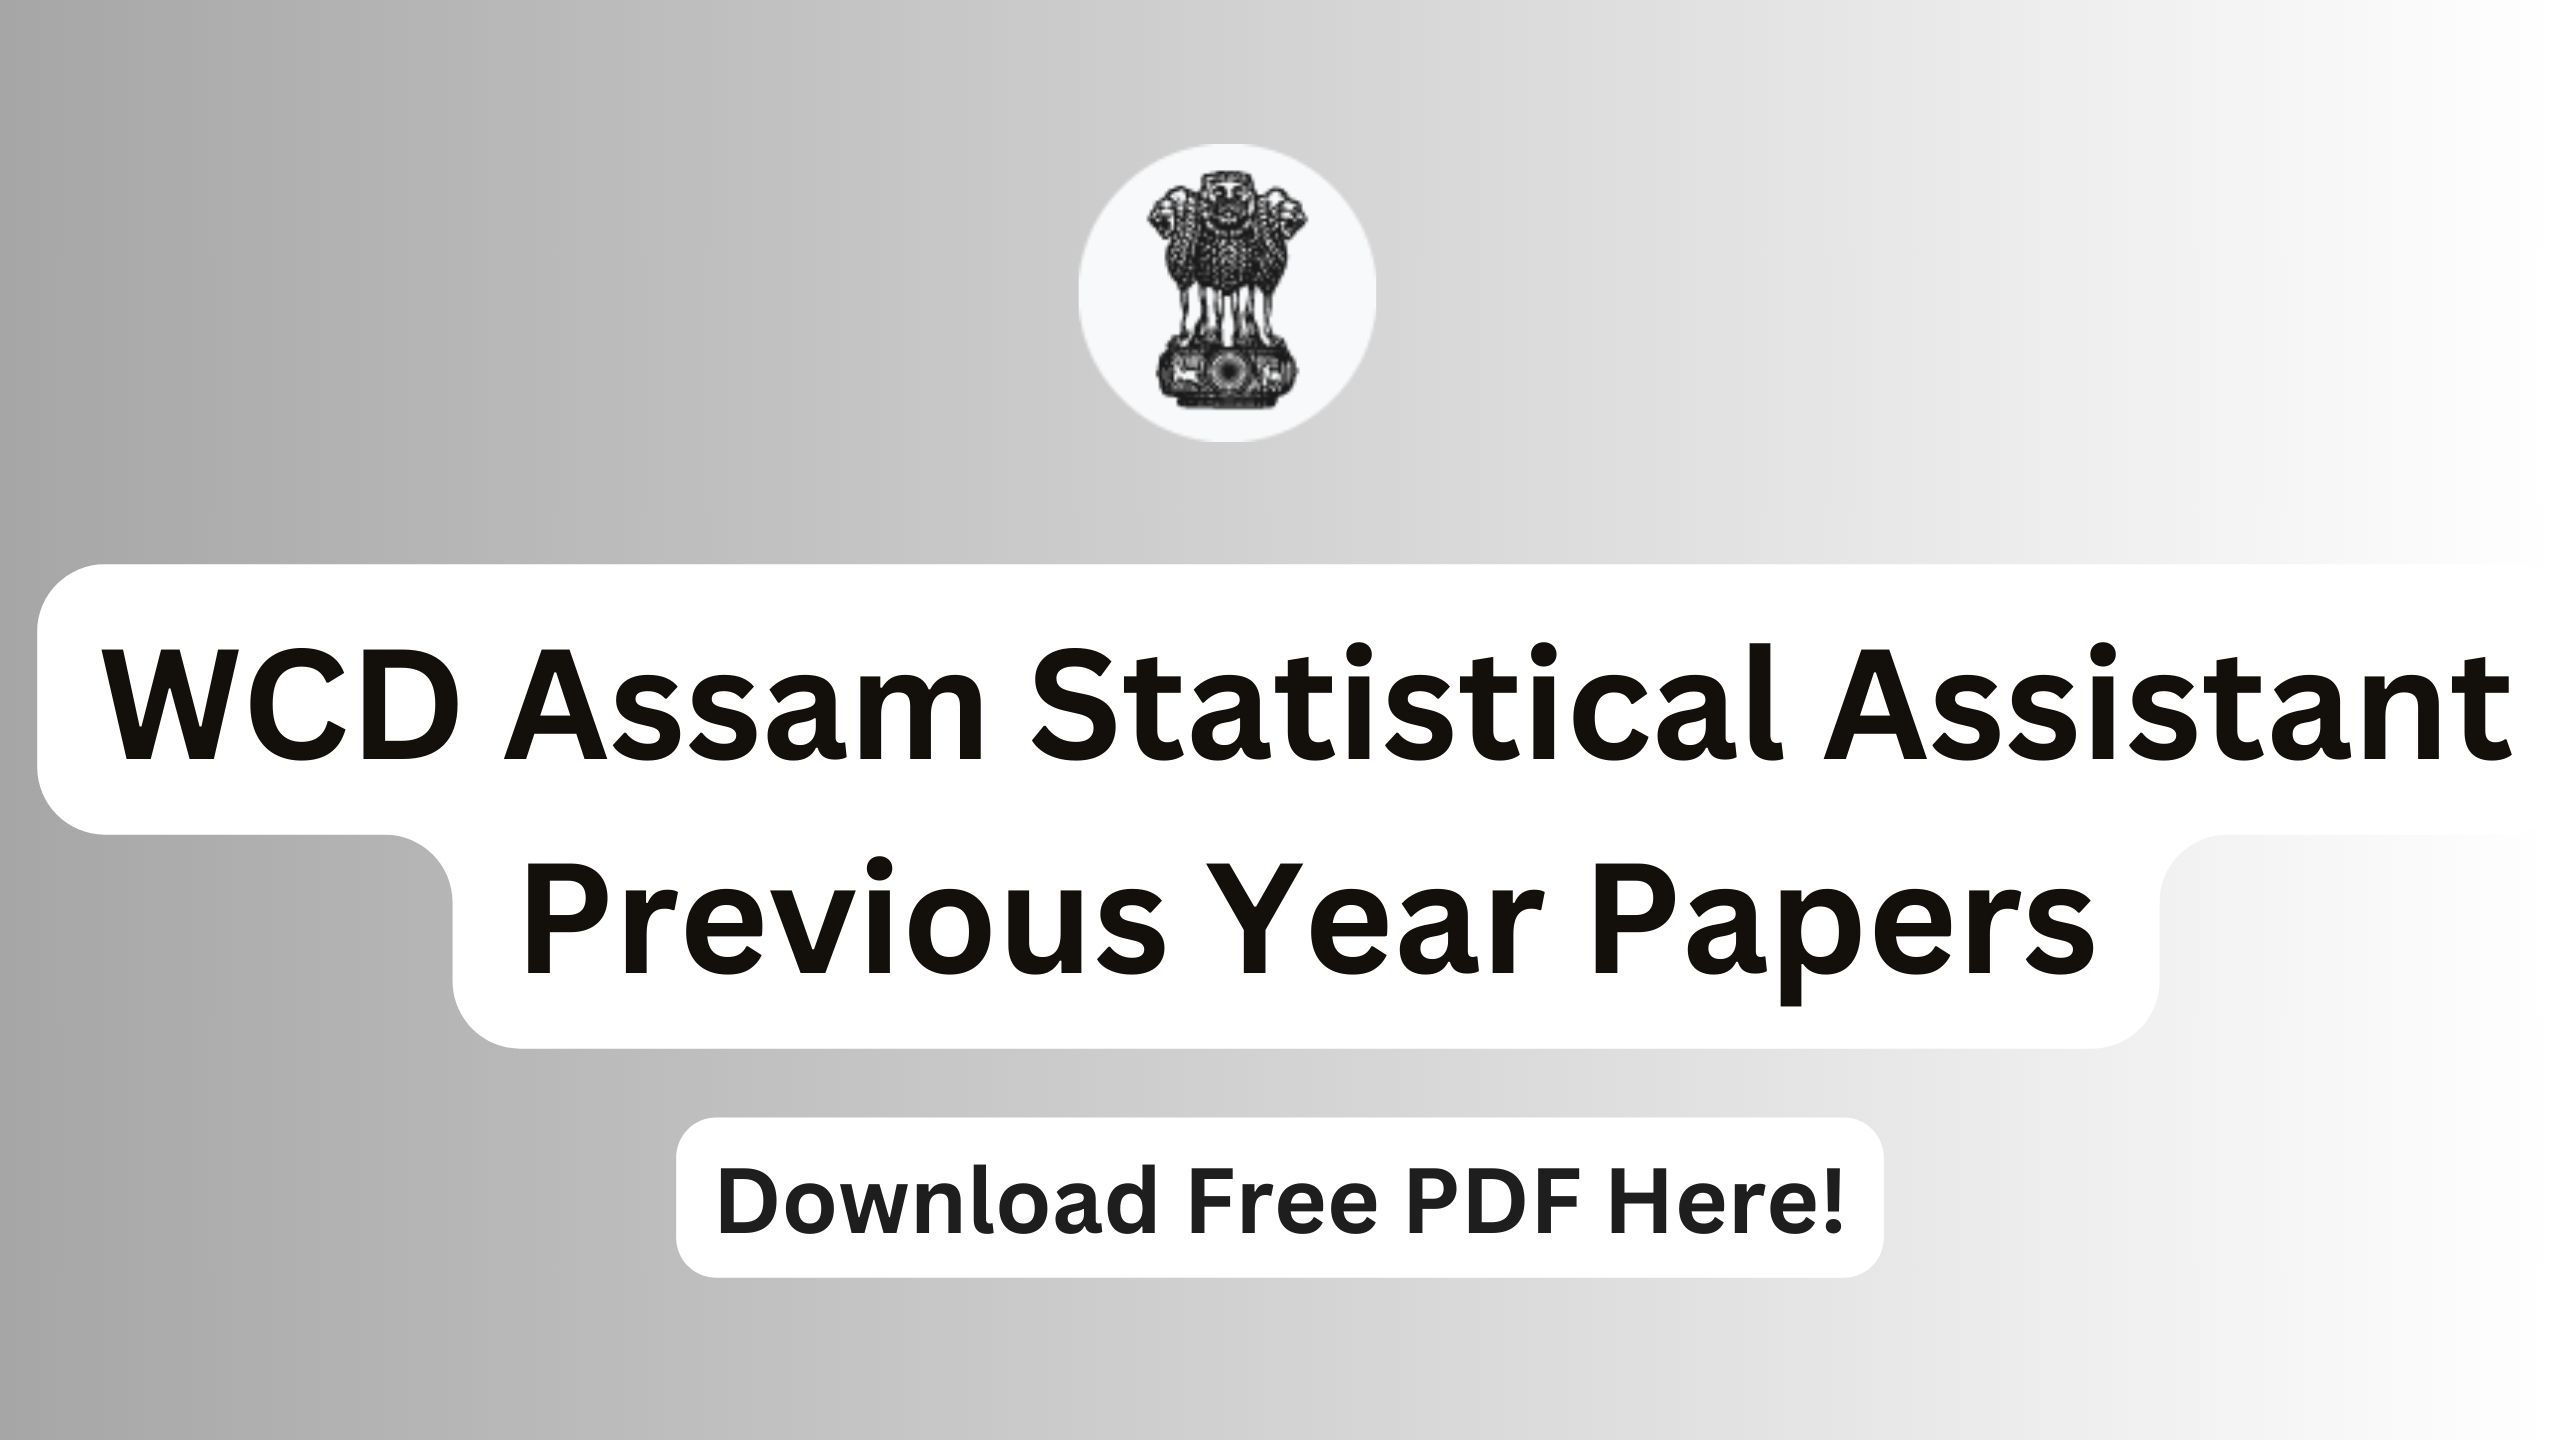 WCD Assam Statistical Assistant Previous Year Papers, Download Free PDF!